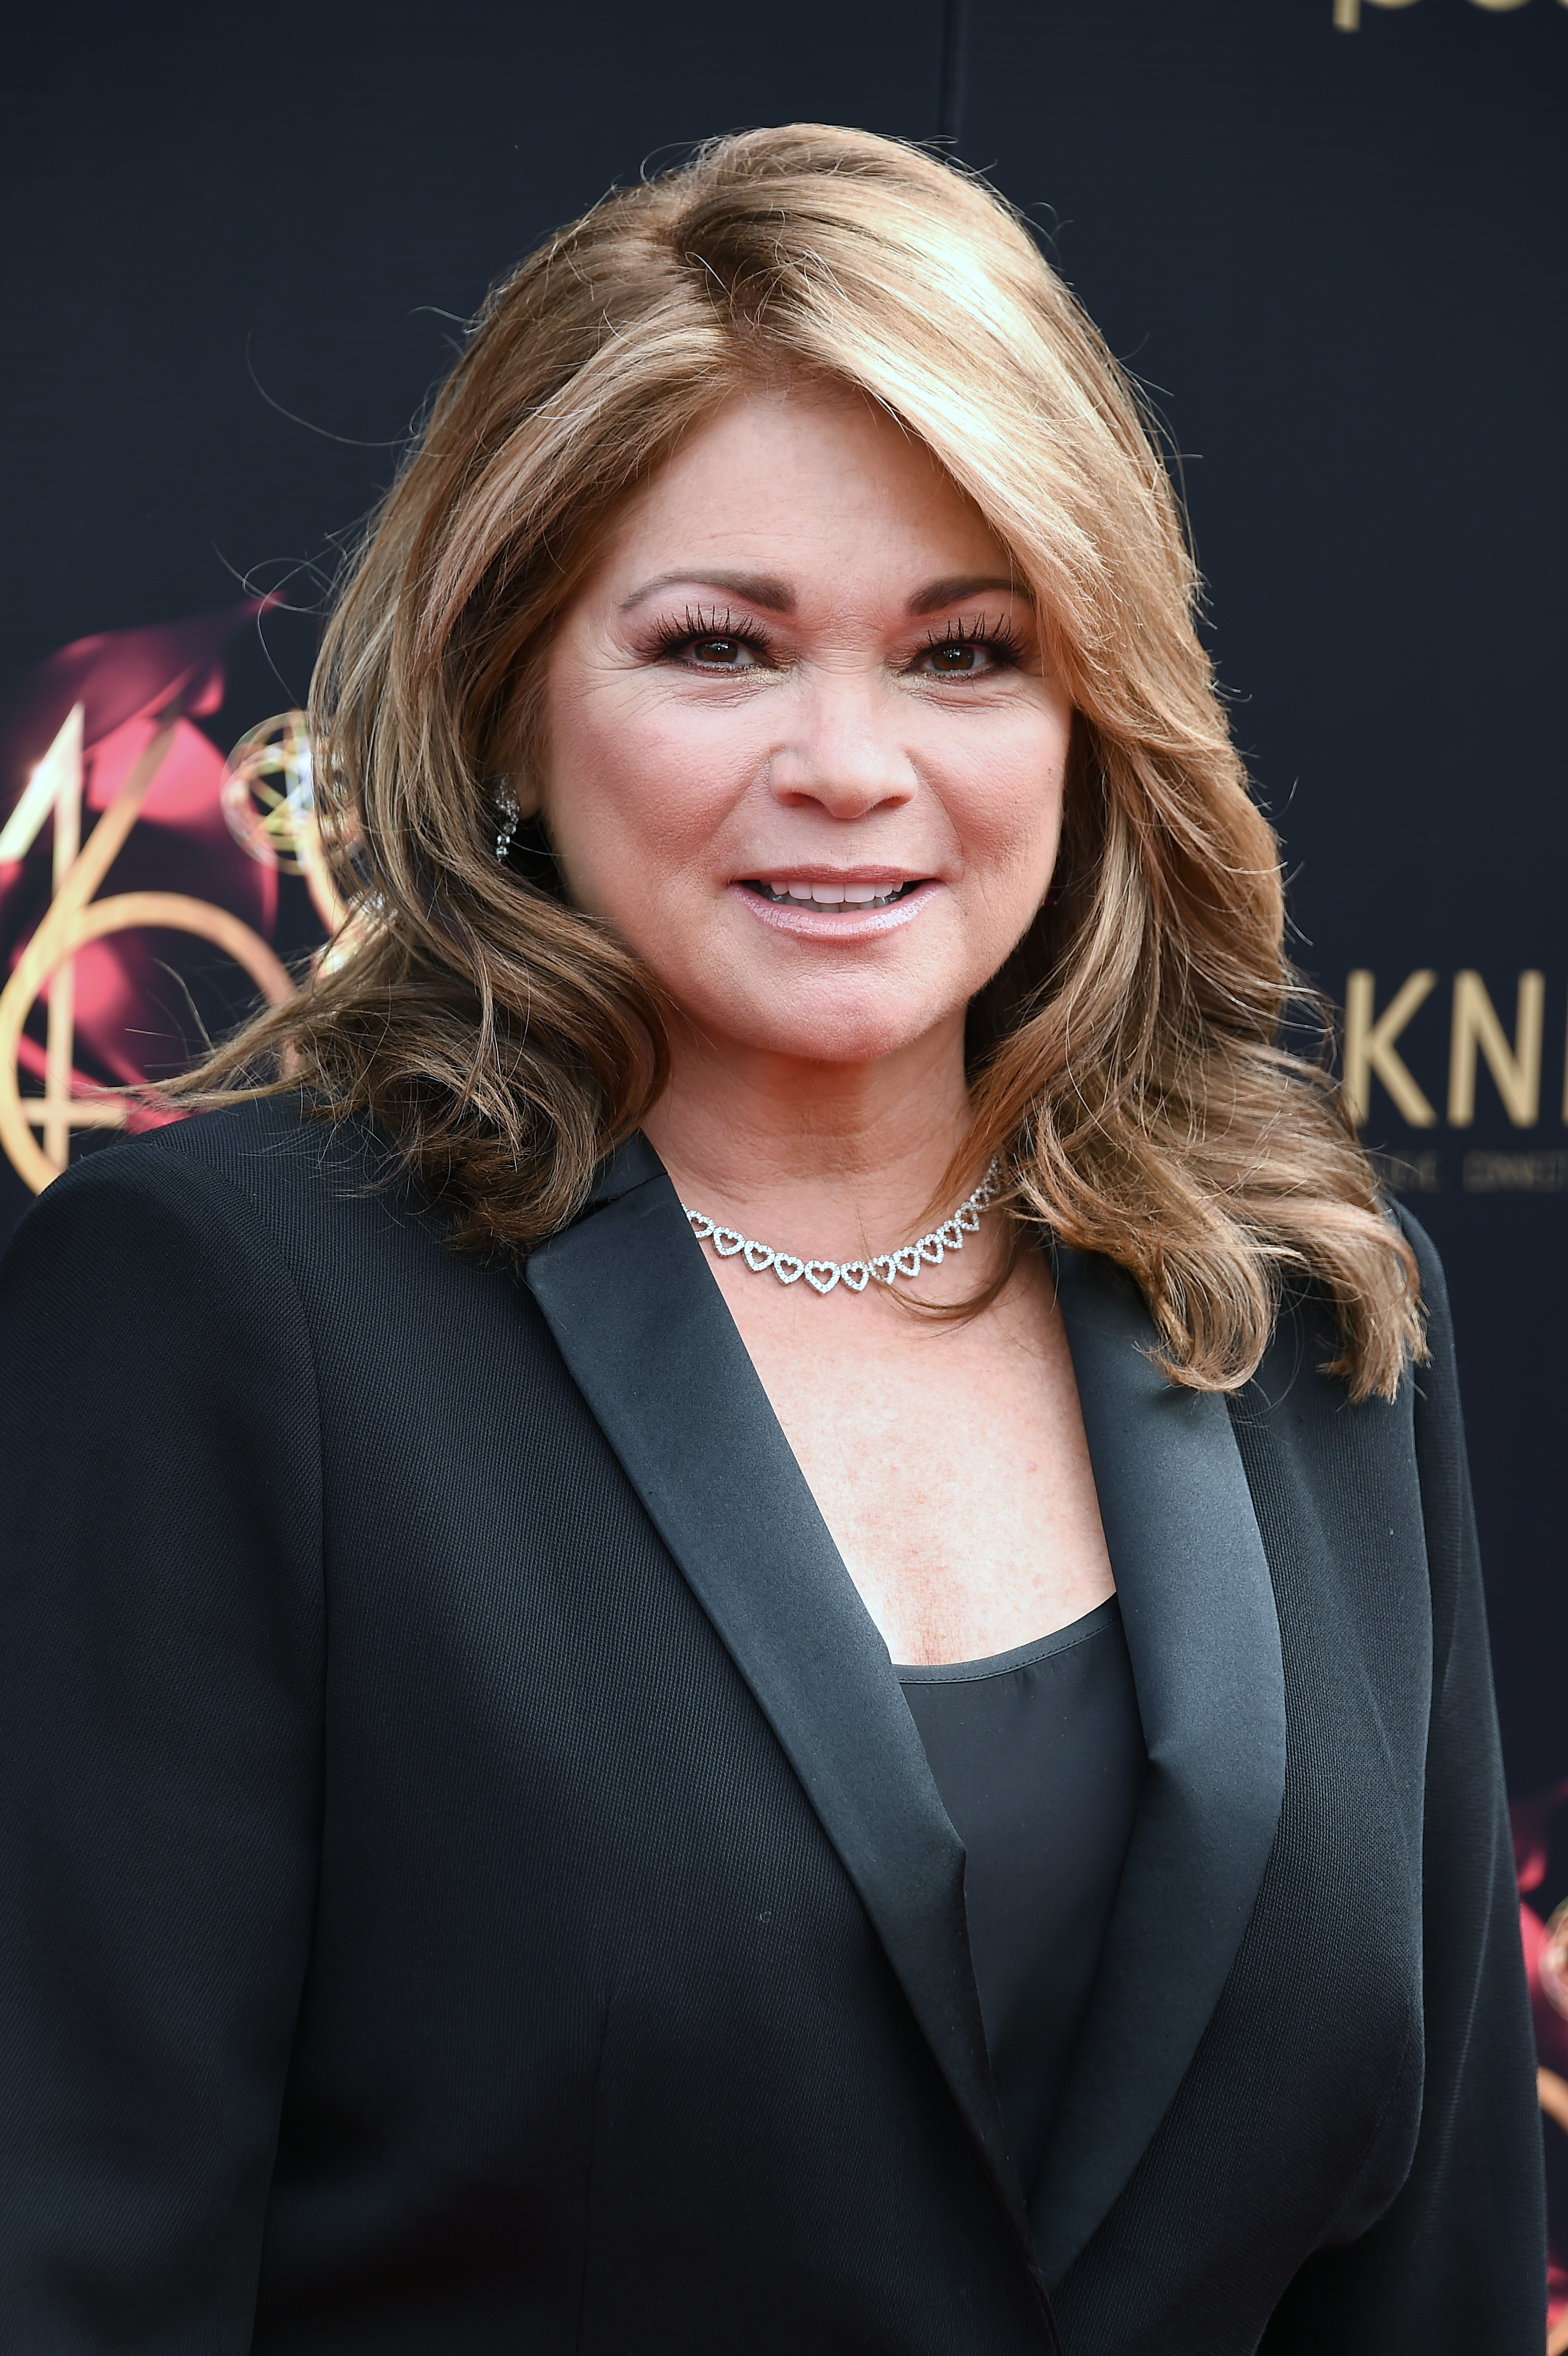 Valerie Bertinelli attends the 46th annual Daytime Emmy Awards at Pasadena Civic Center on May 05, 2019 in Pasadena, California. 